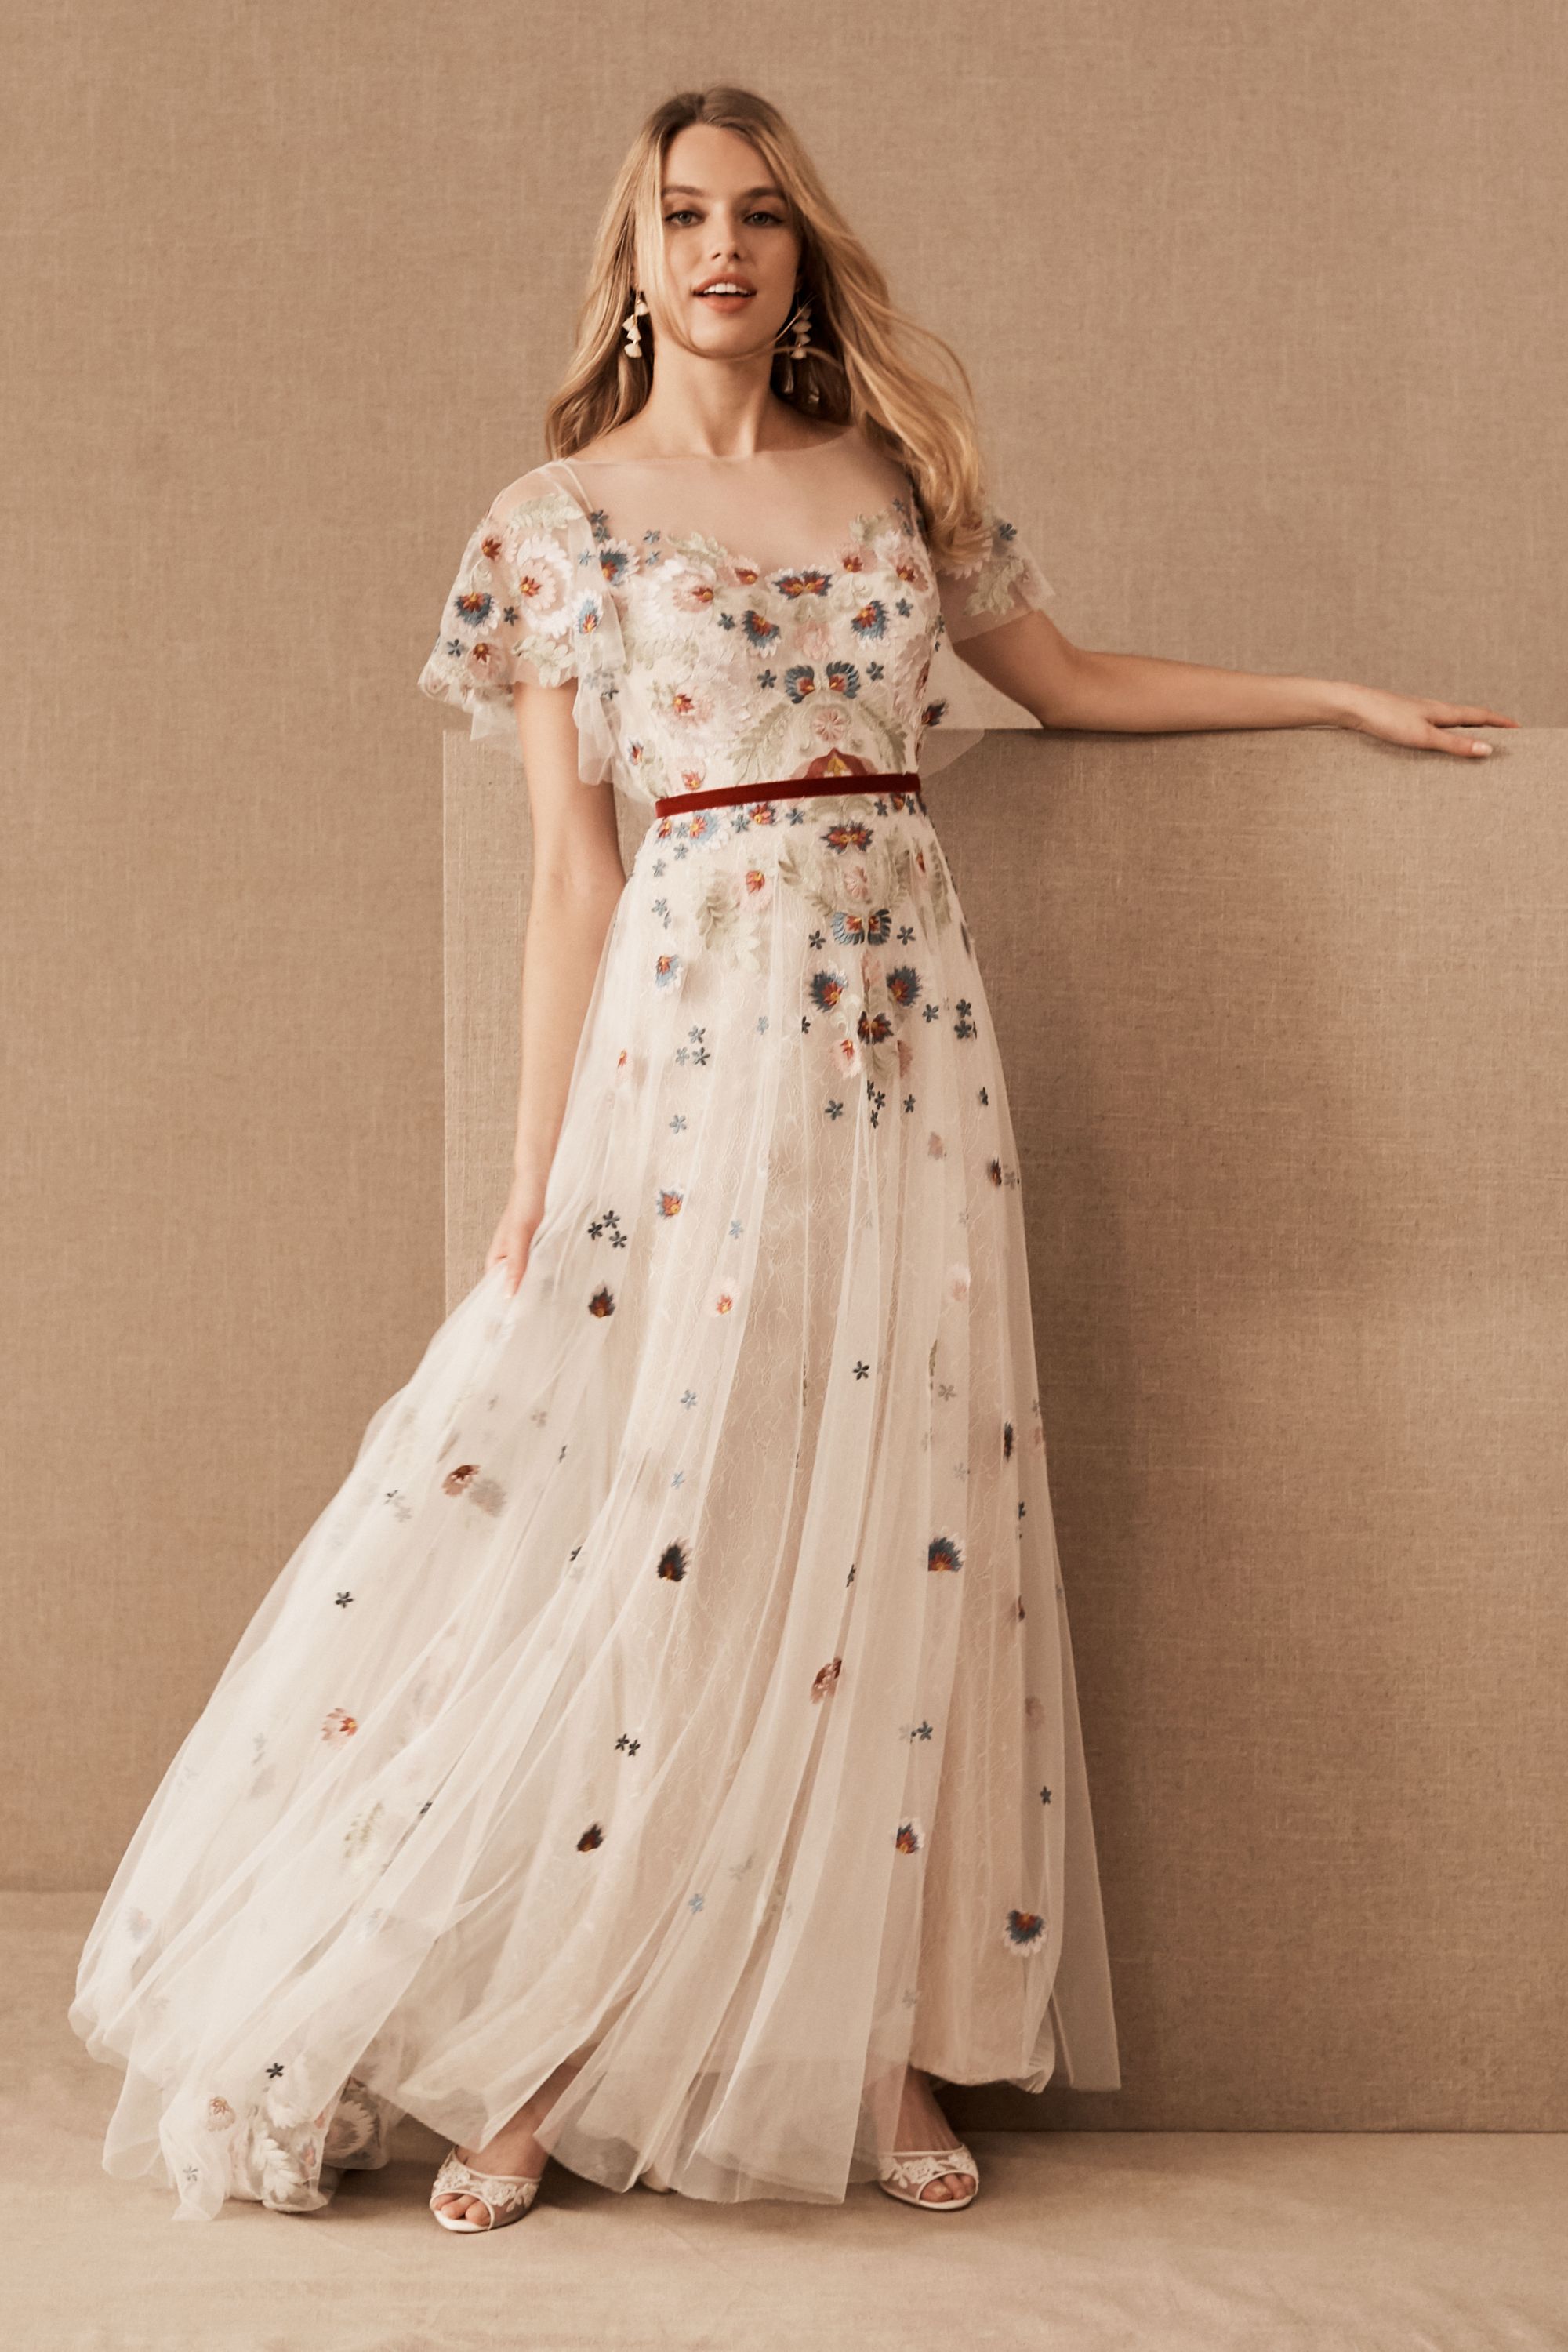 Willowby by Watters Heartleaf Gown - BHLDN. waters by willowby. 